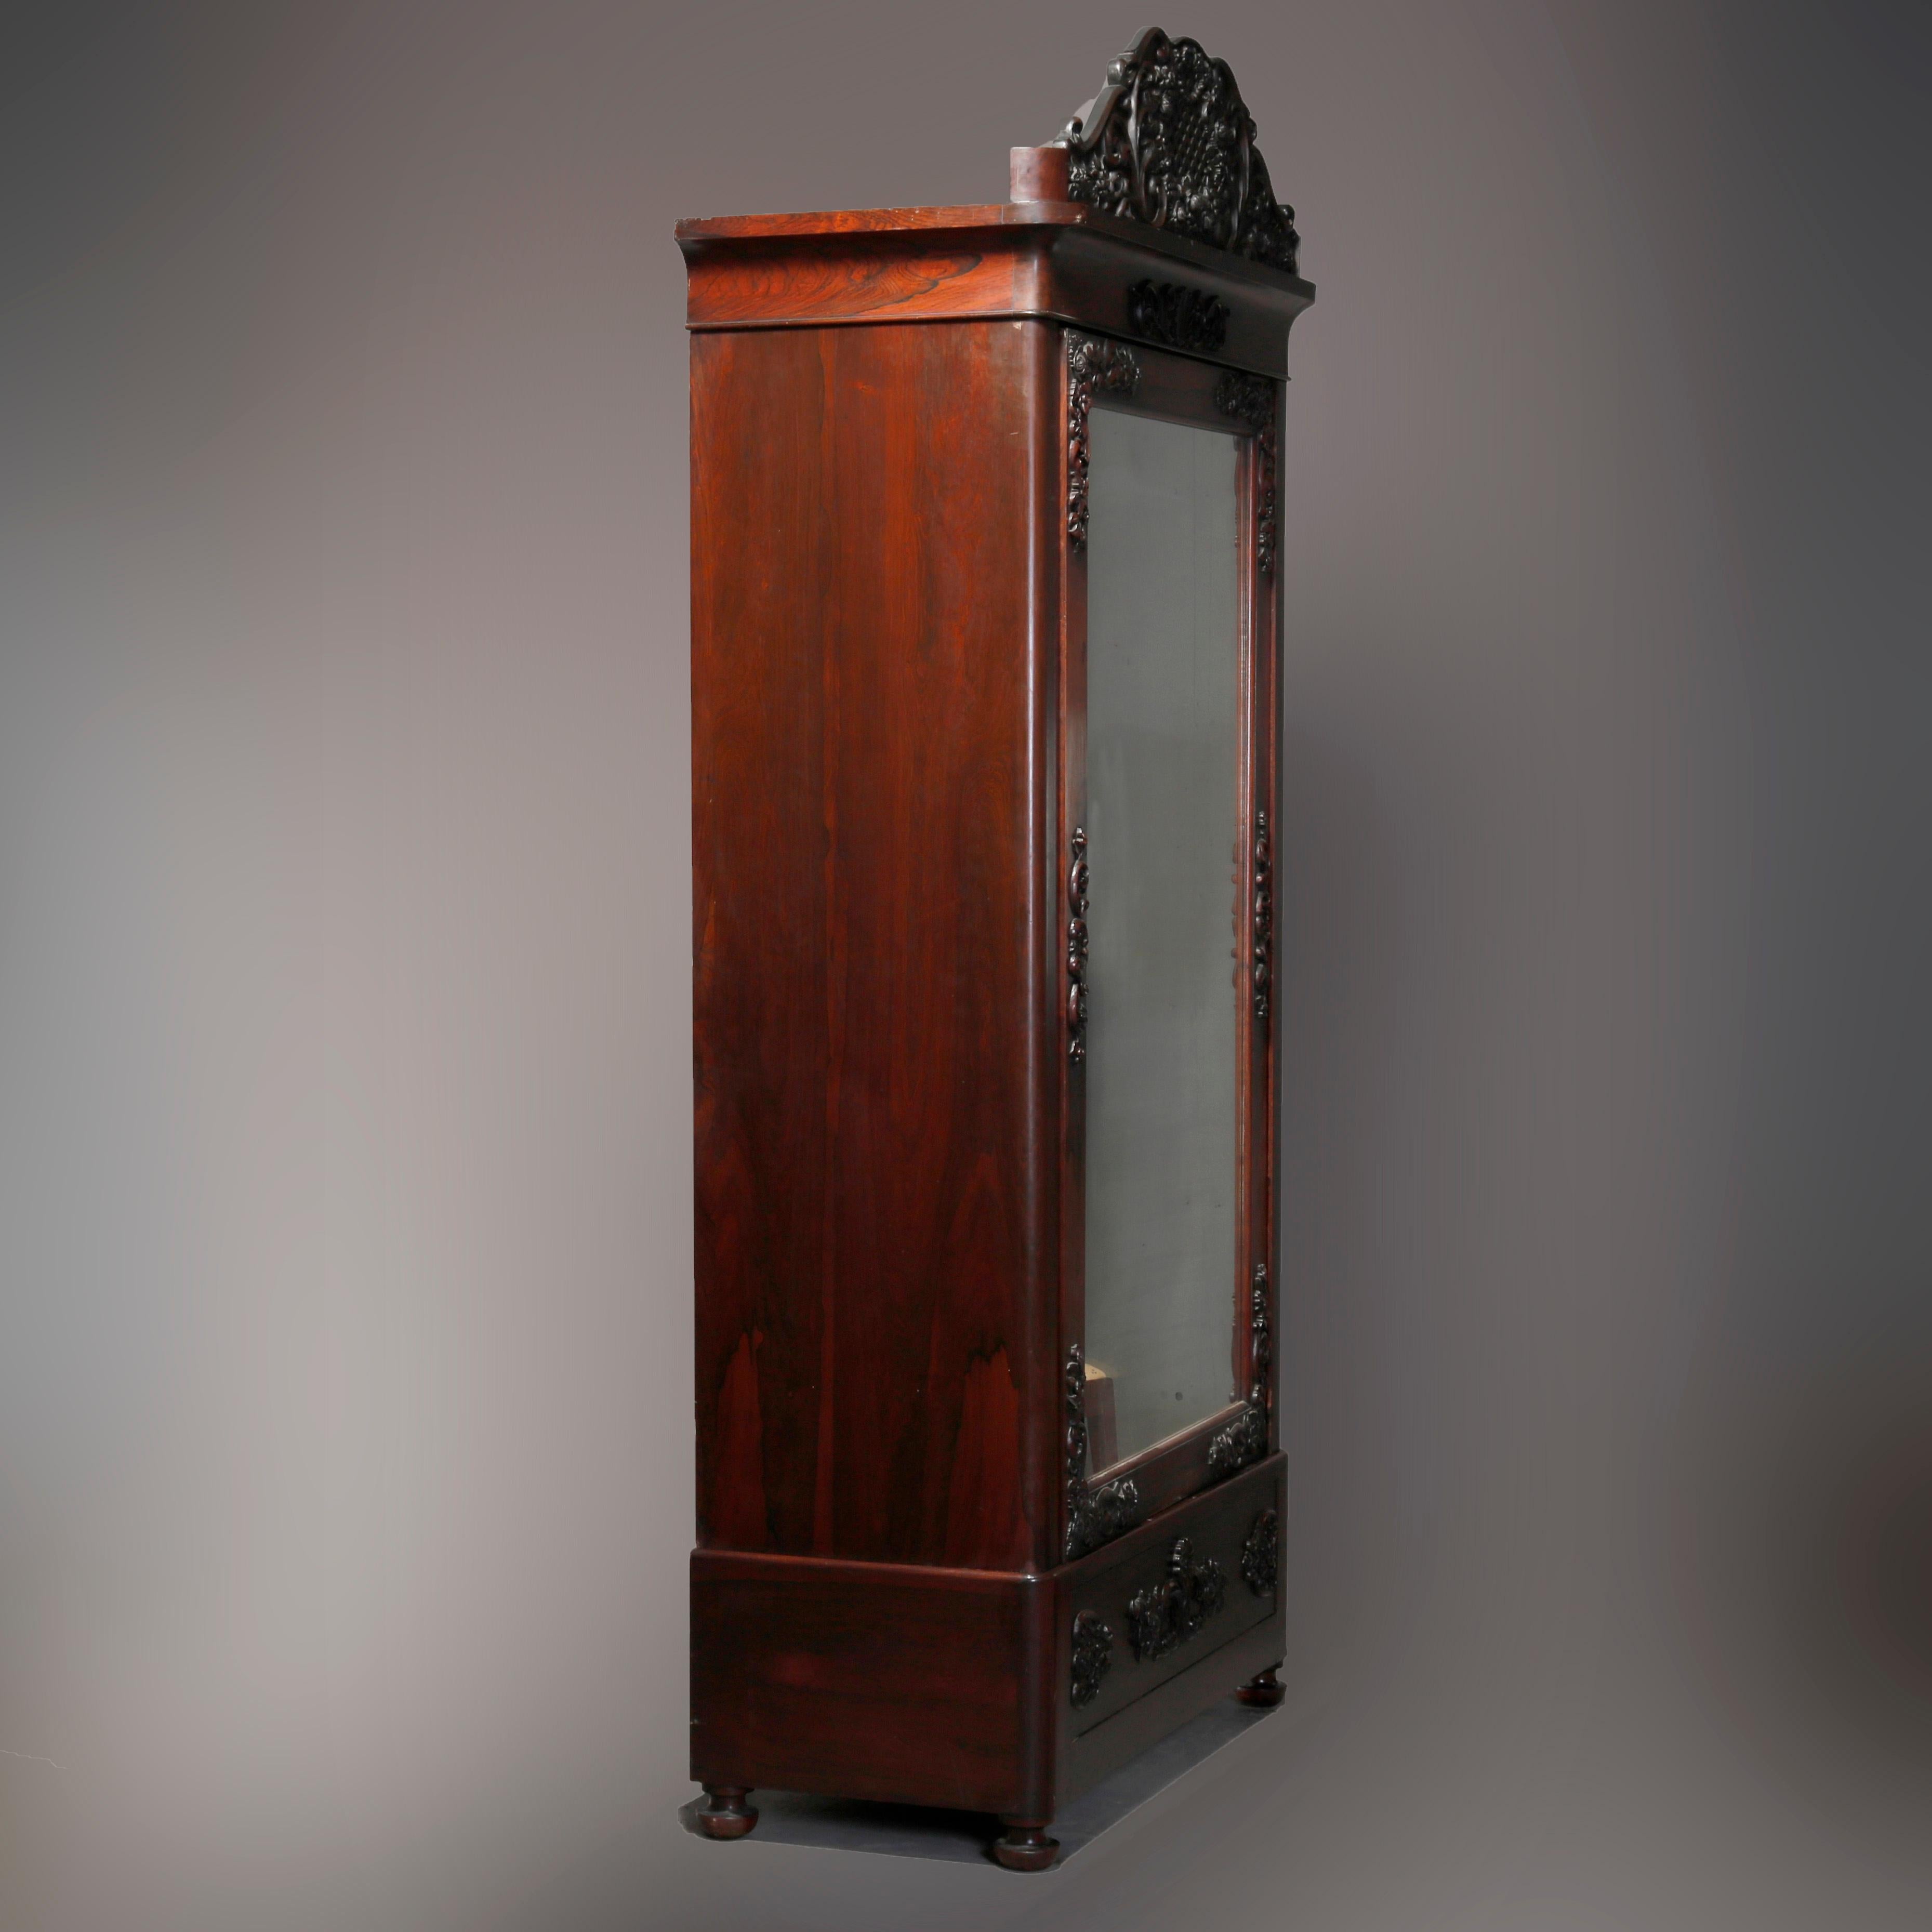 European Antique Rococo Revival Carved Rosewood Mirrored Armoire, circa 1860